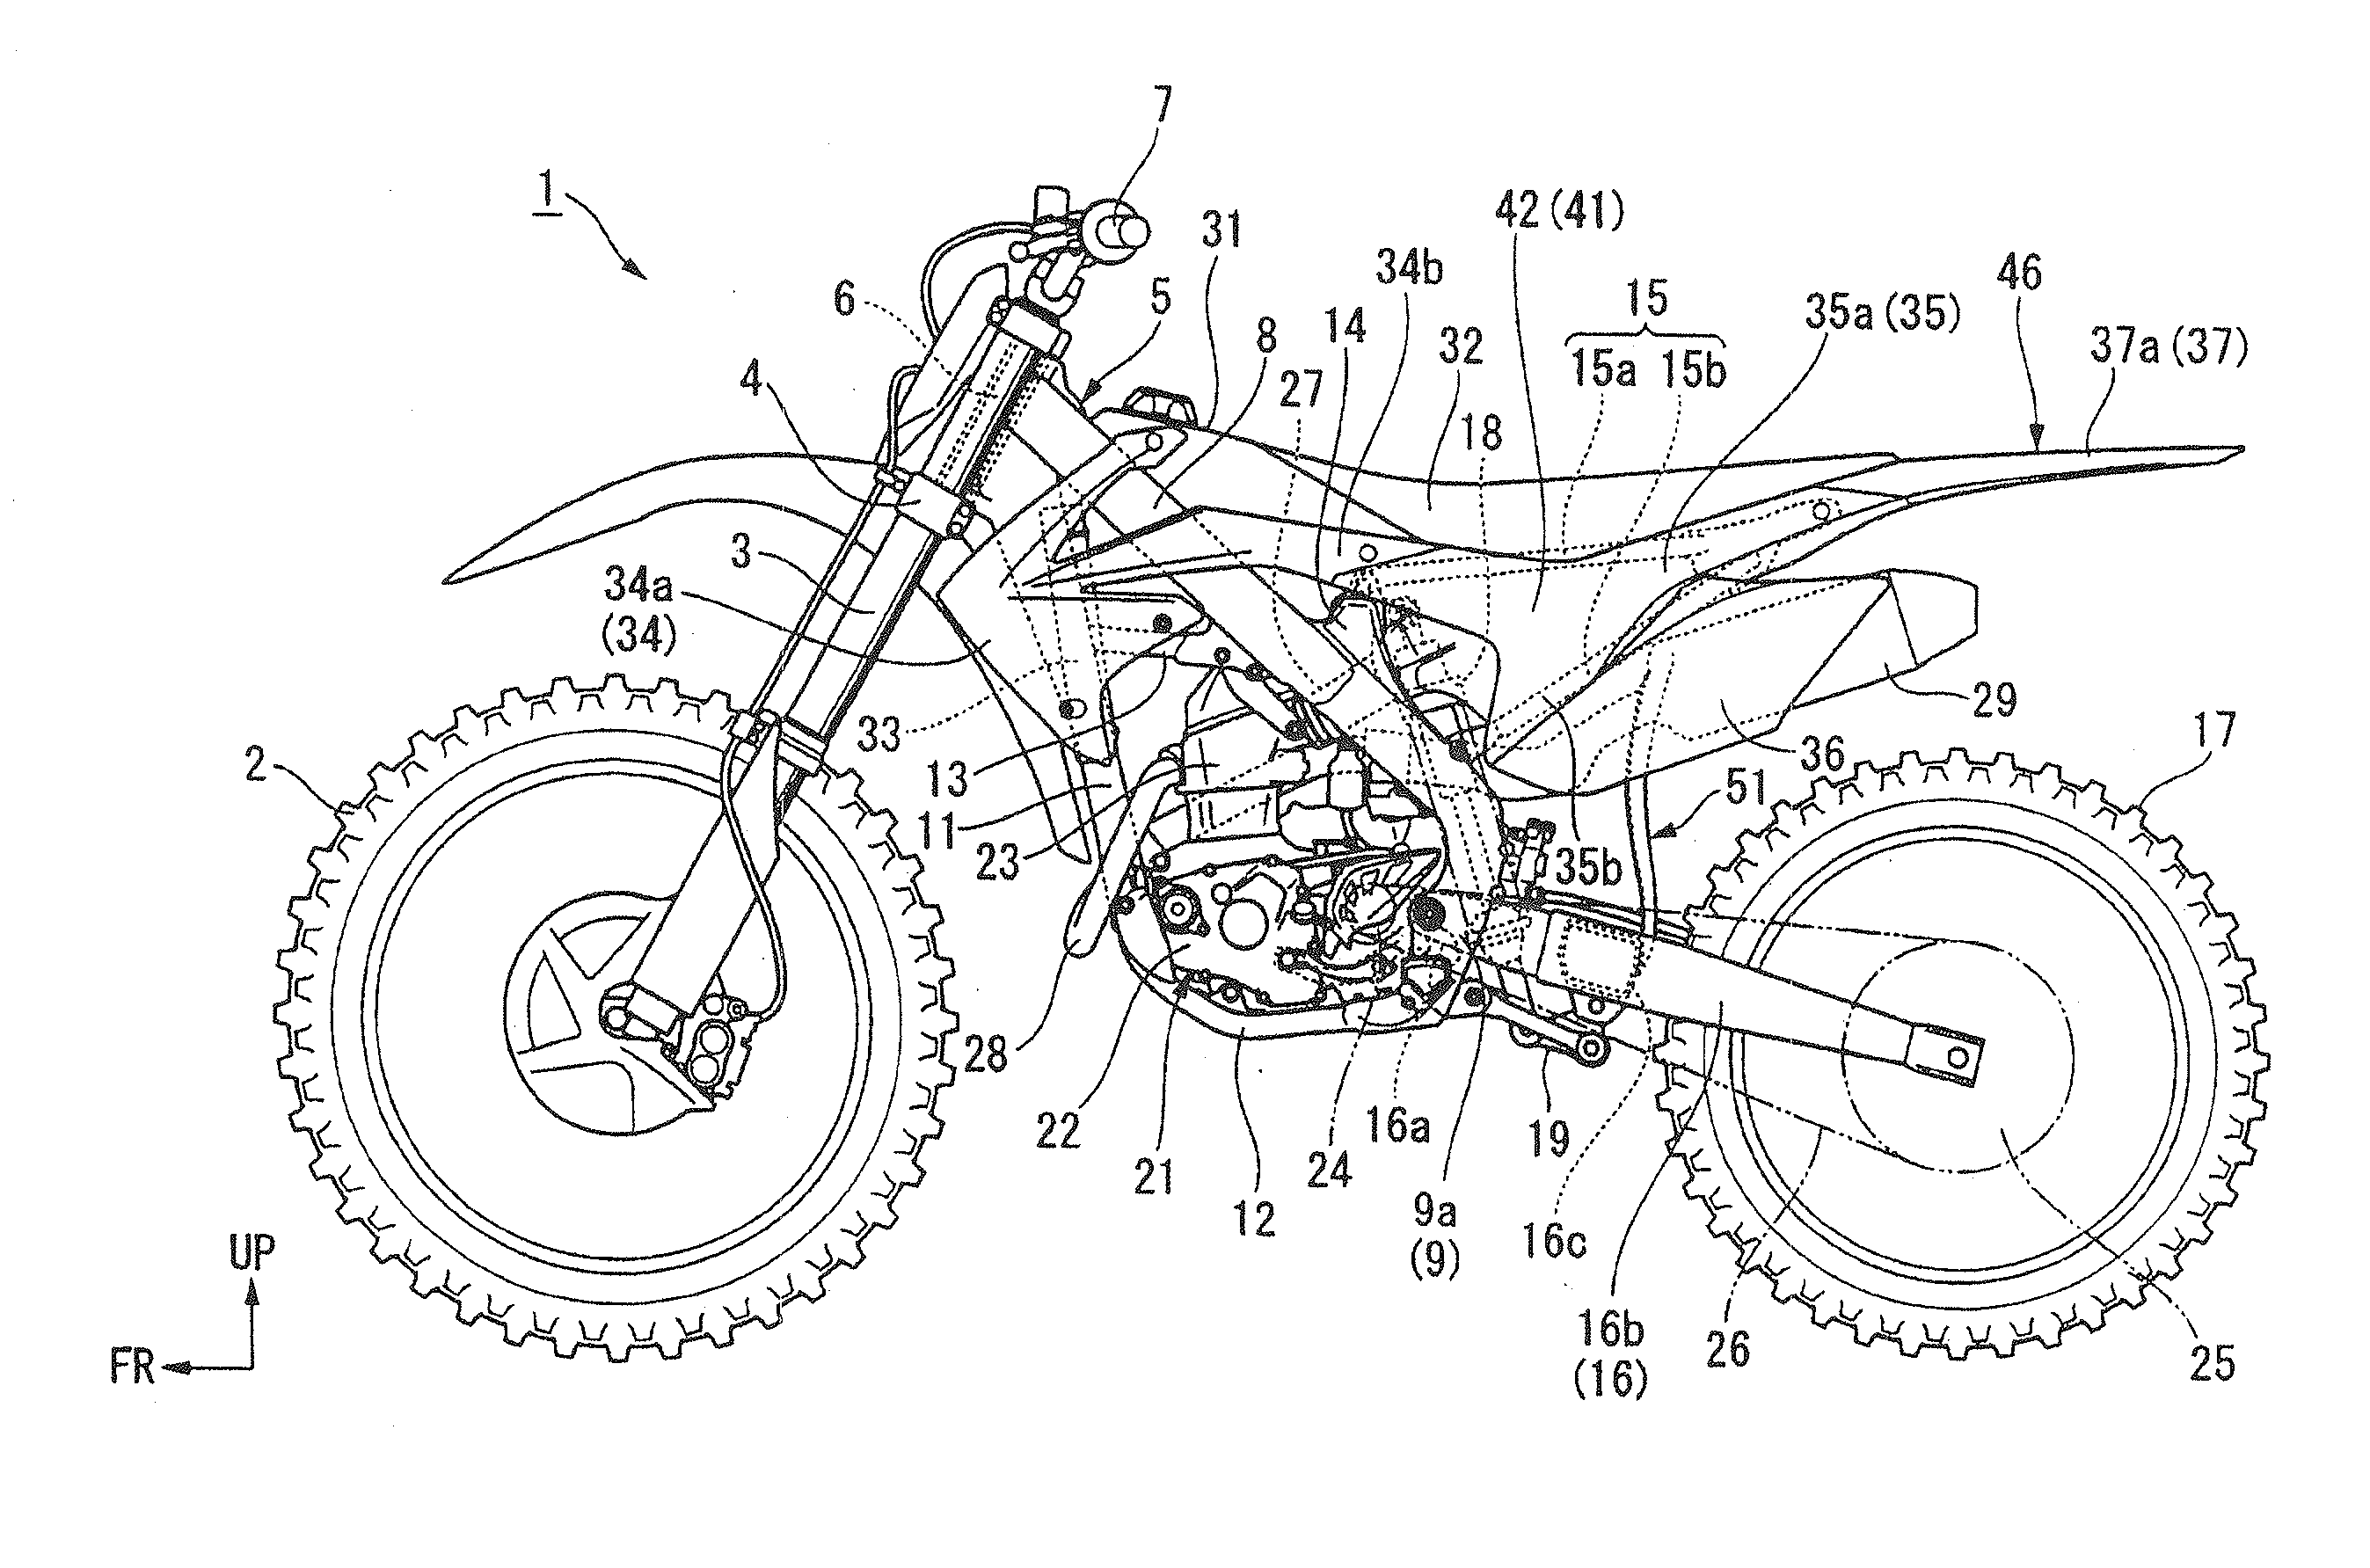 Mudguard structure for straddle-ride type vehicle